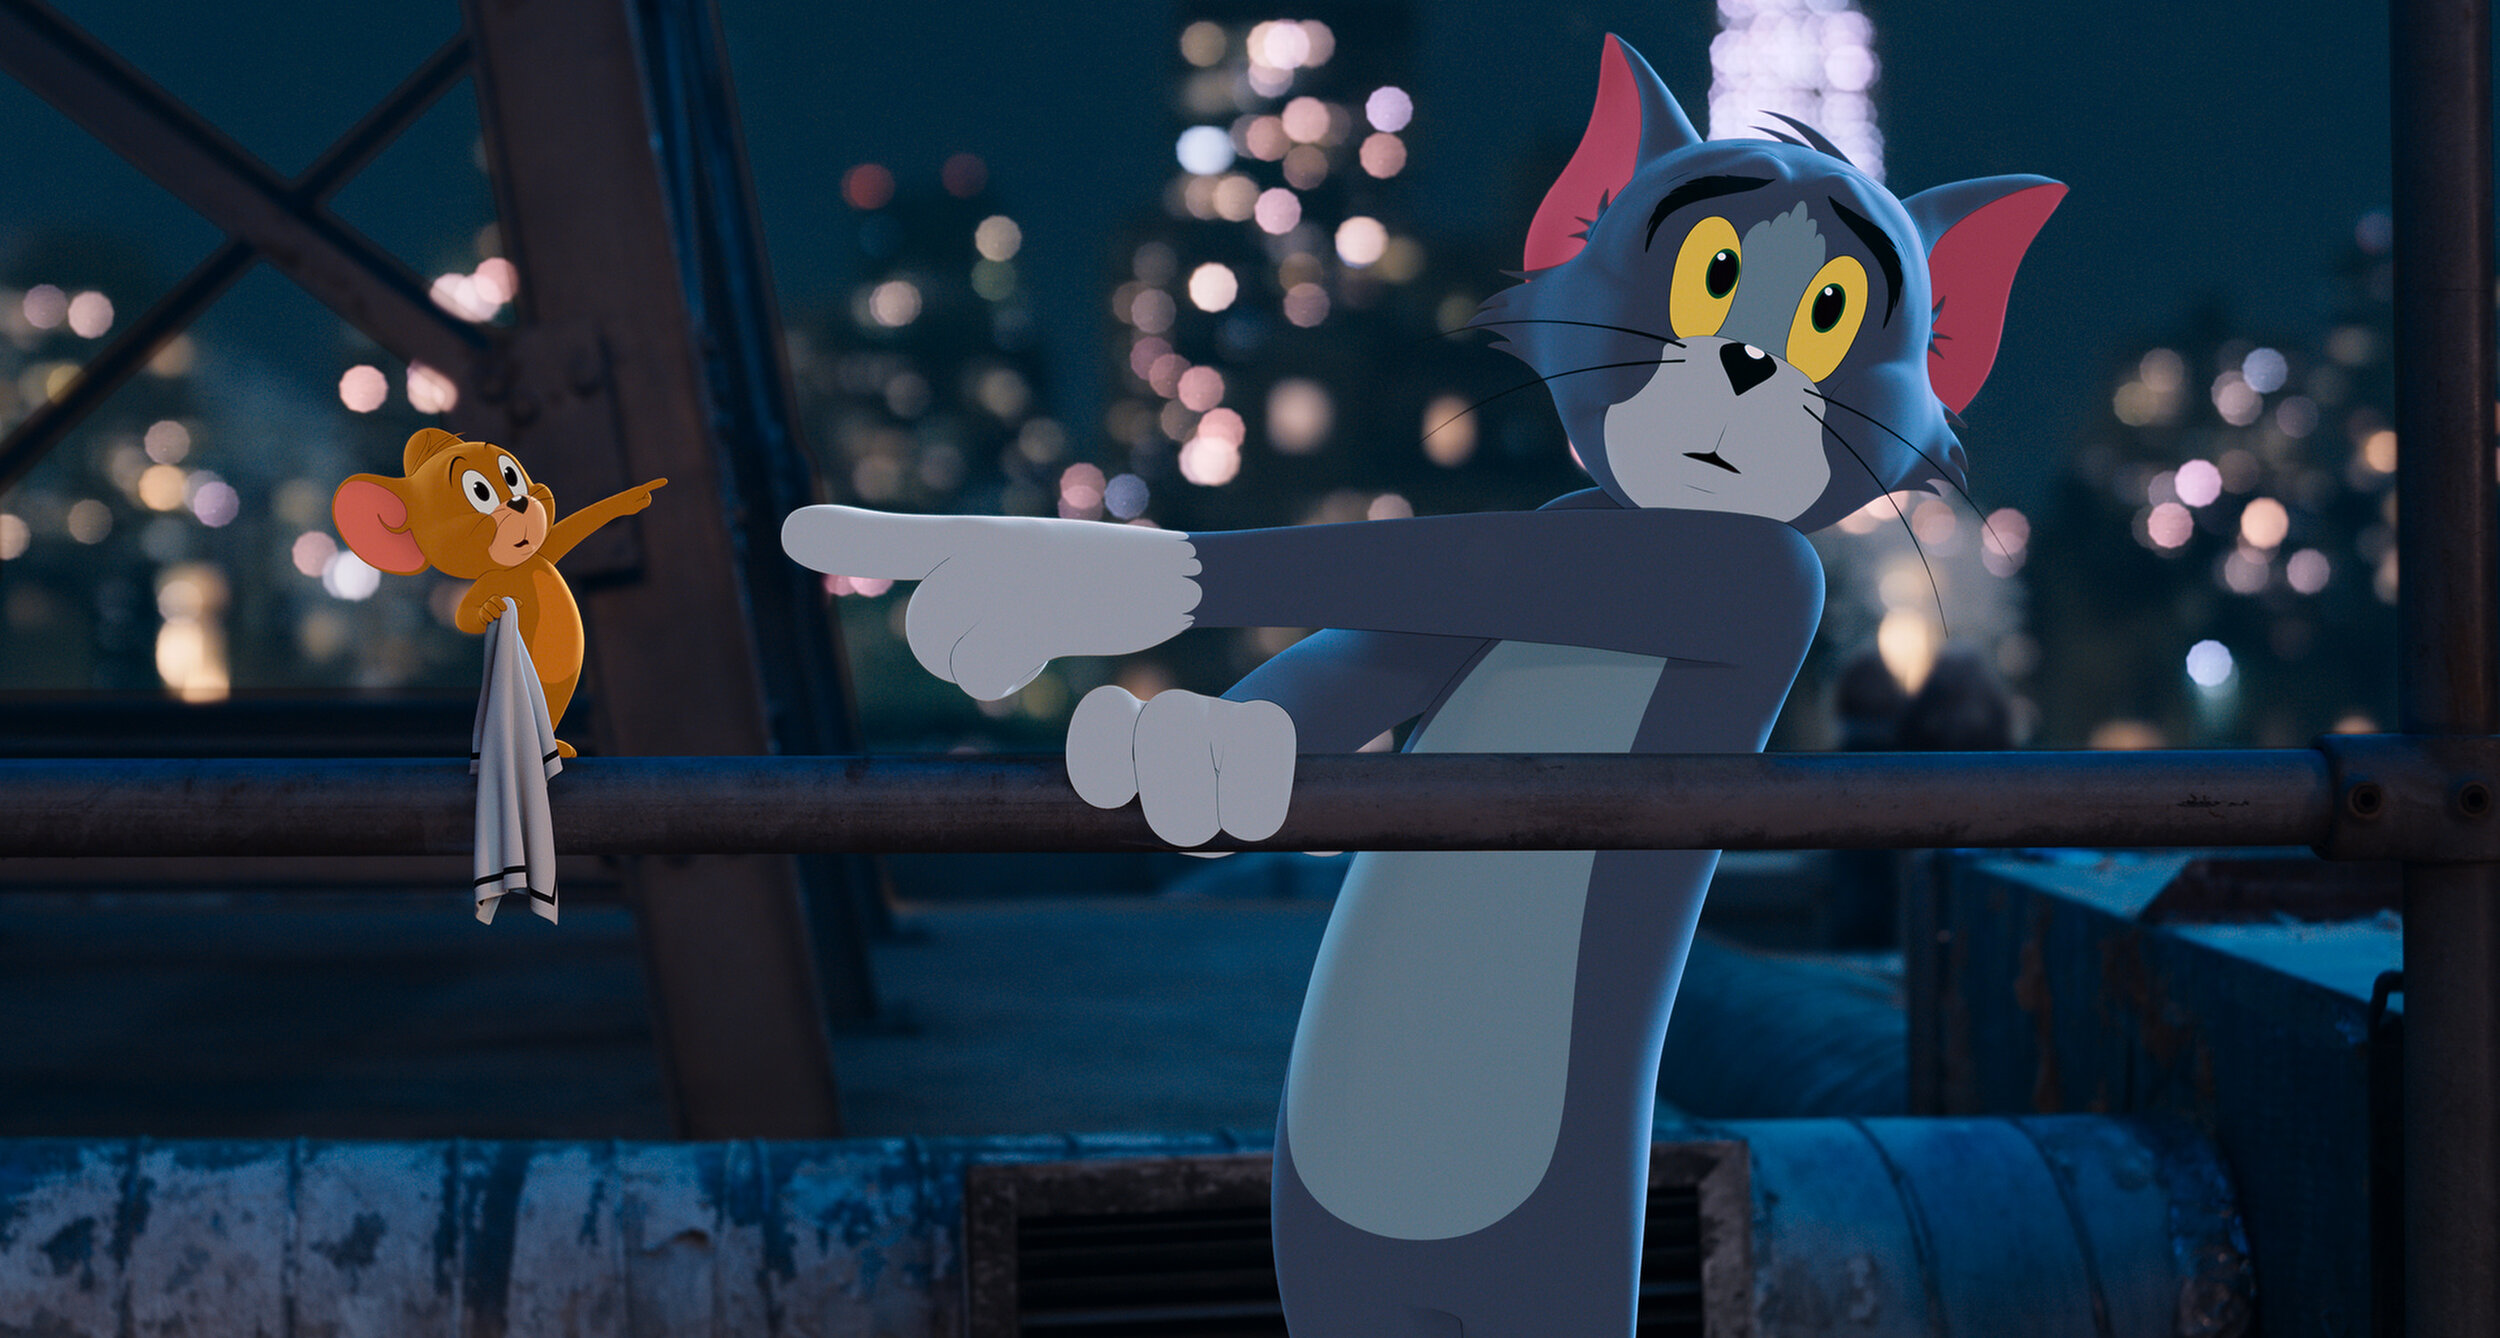 Exclusive: Chloe Grace Moretz On The Live-Action Hybrid 'Tom & Jerry' —